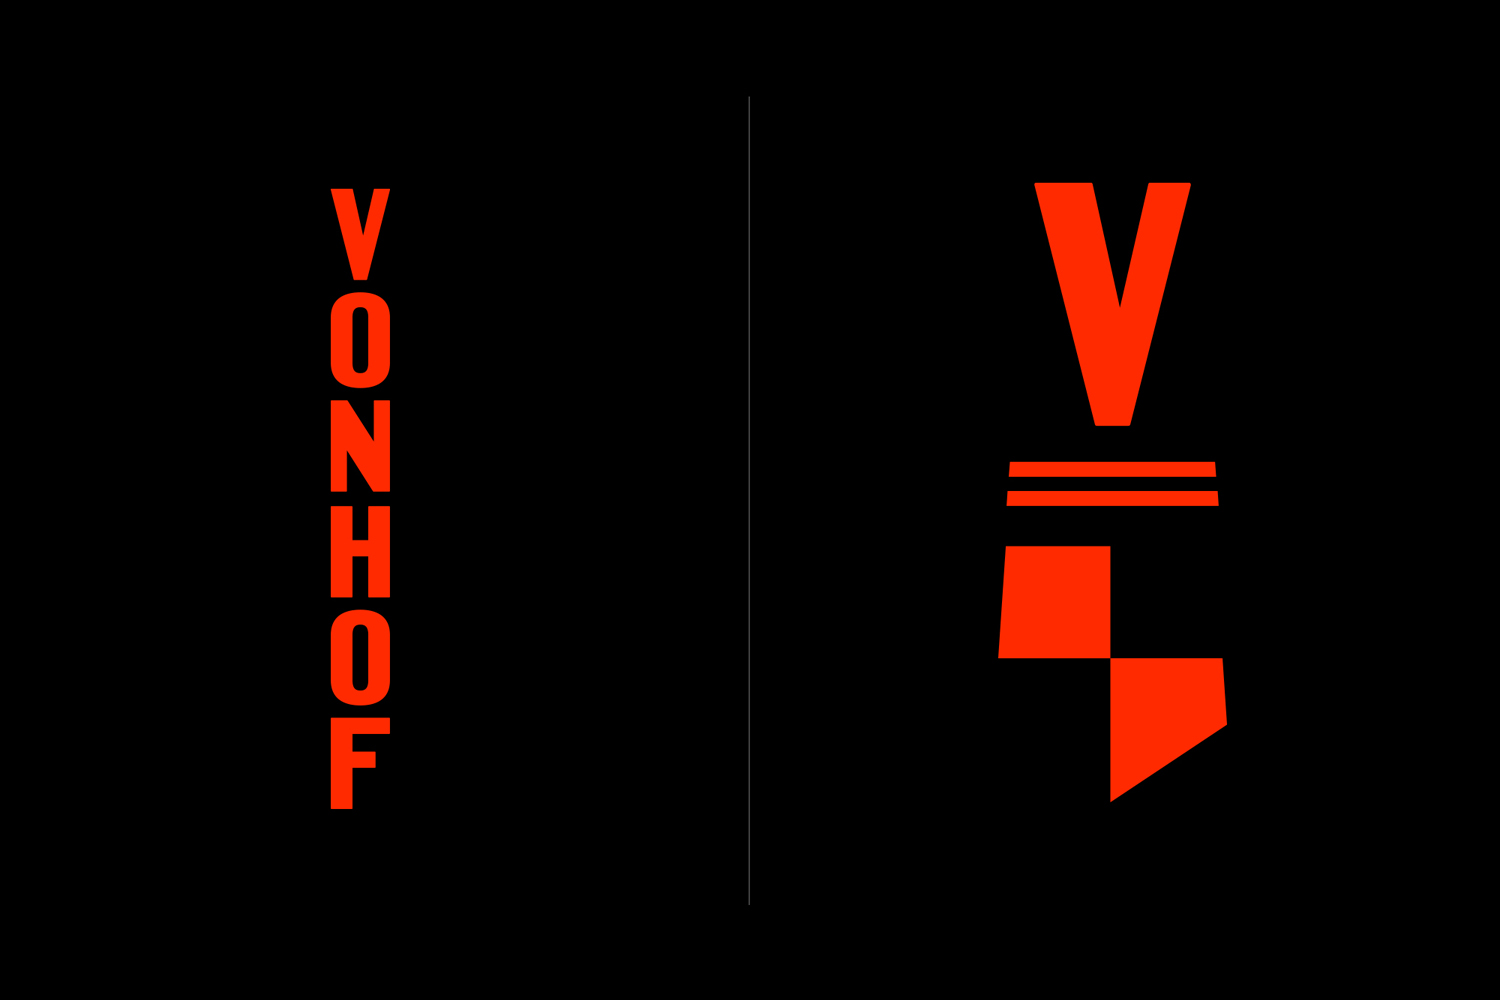 Custom wordmark for New Jersey-based VonHof Cycles by Franklyn, United States